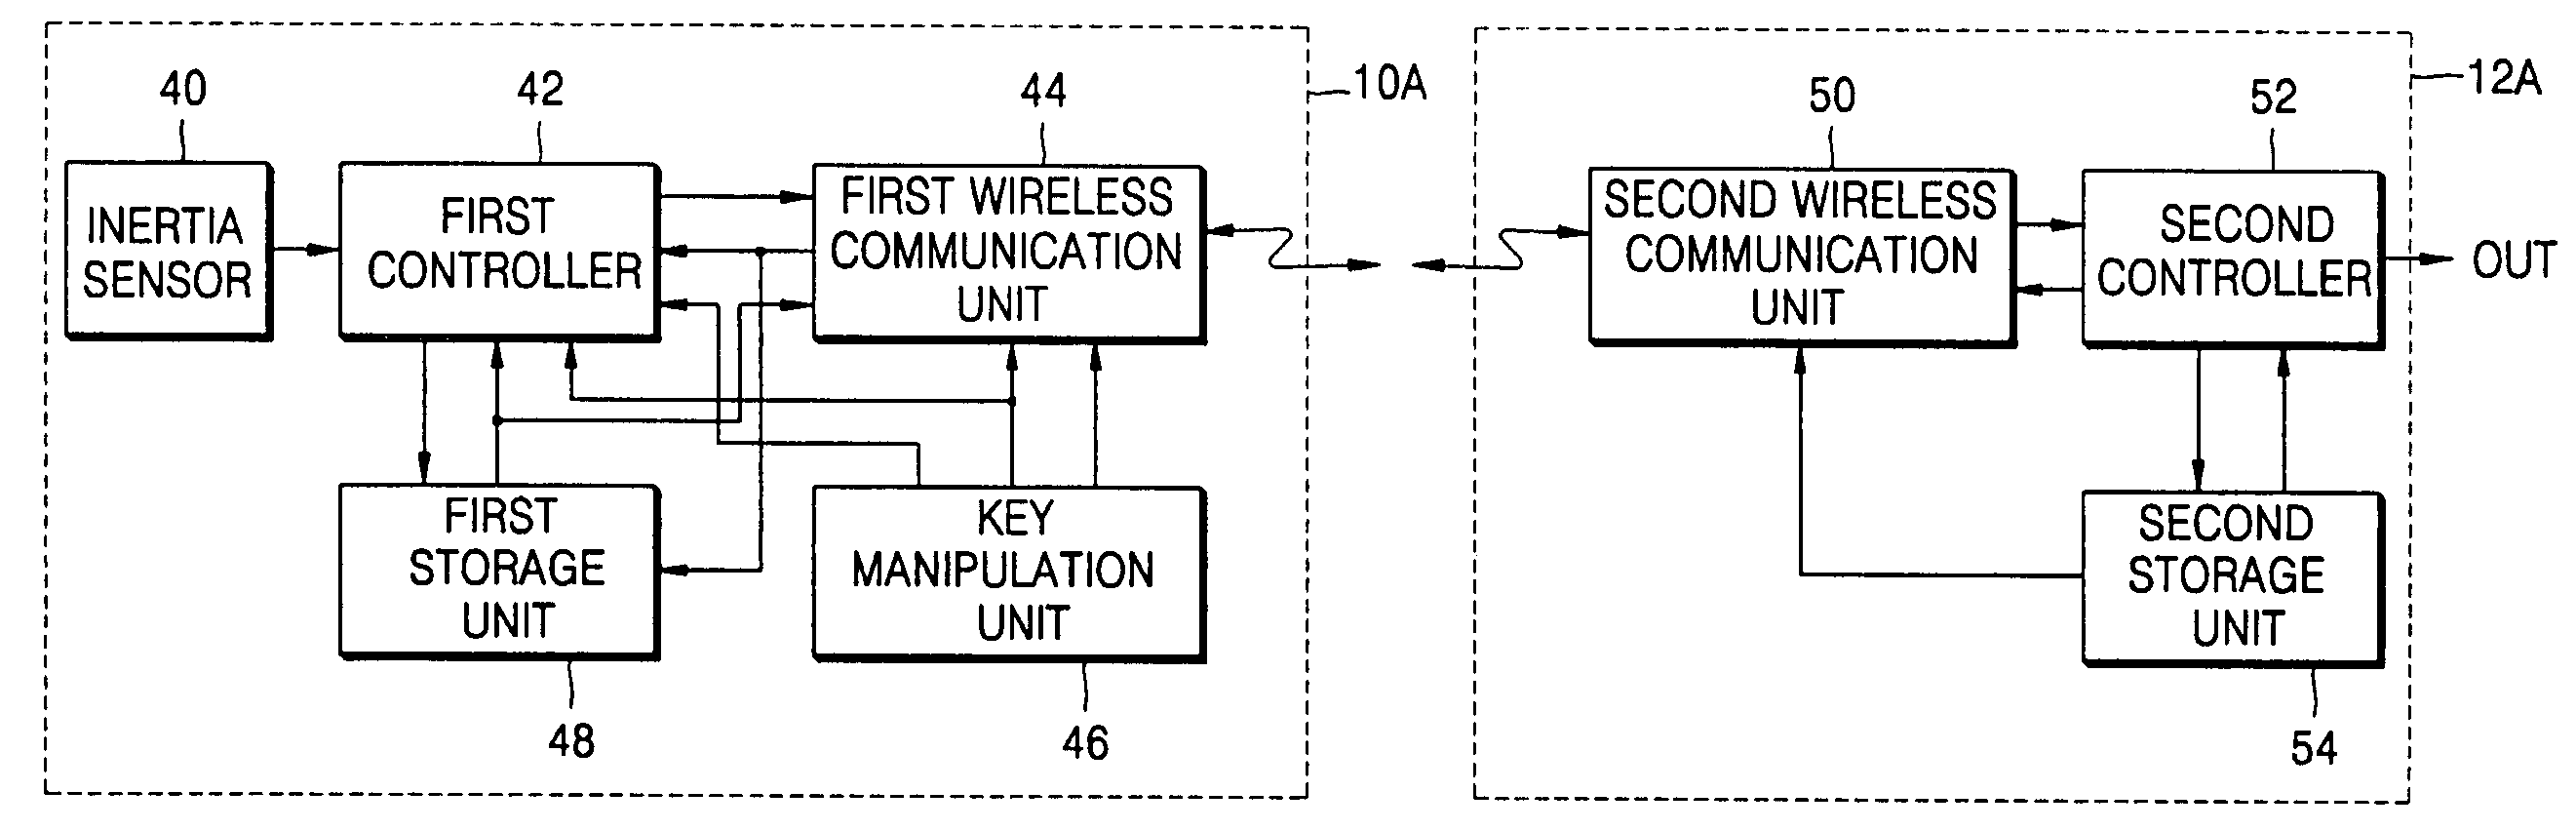 Apparatus and method for processing information using wireless communication terminal